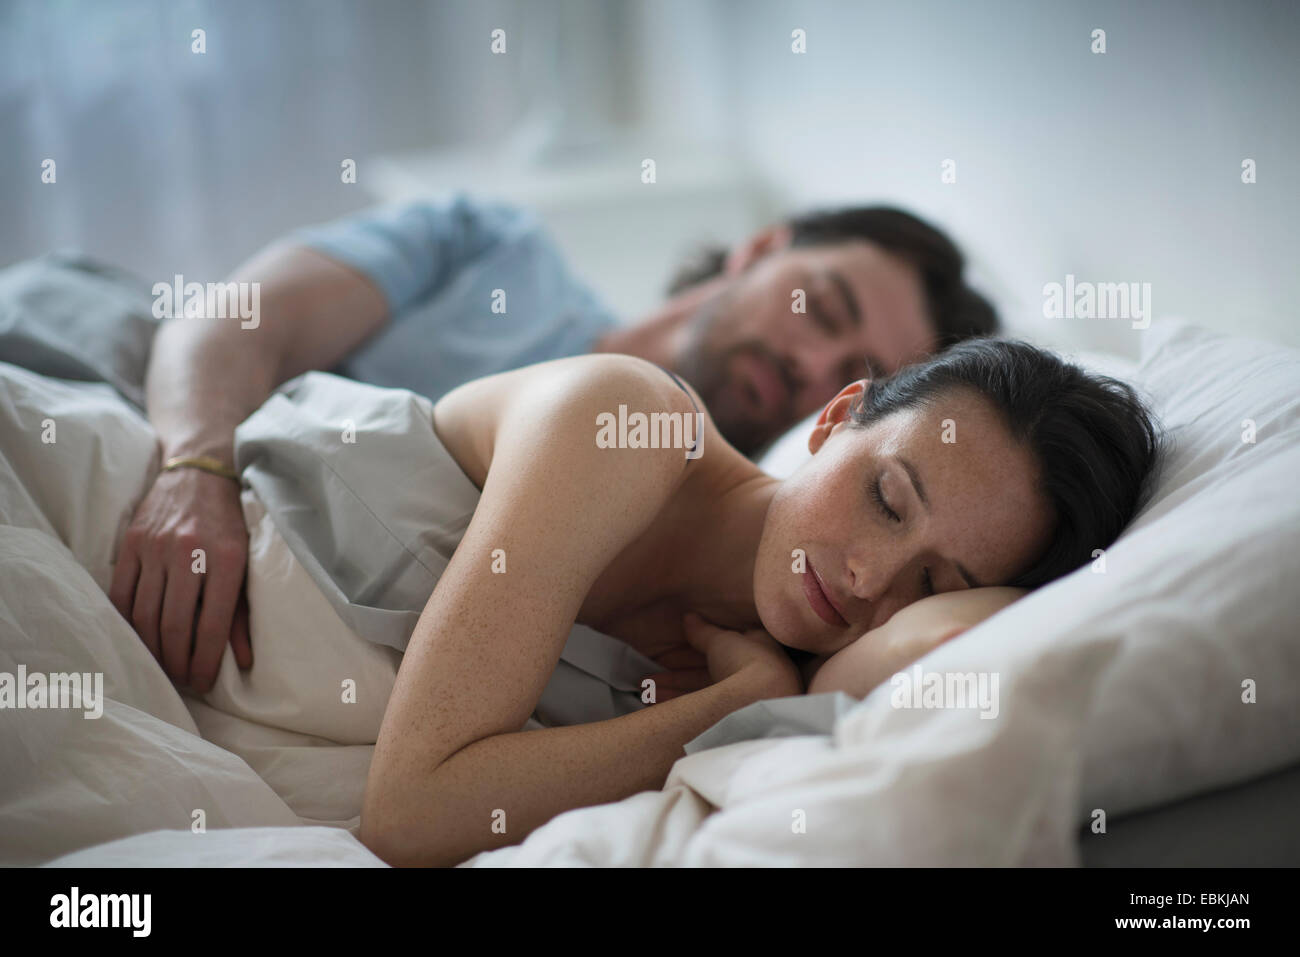 Couple sleeping together in bed at night Stock Photo